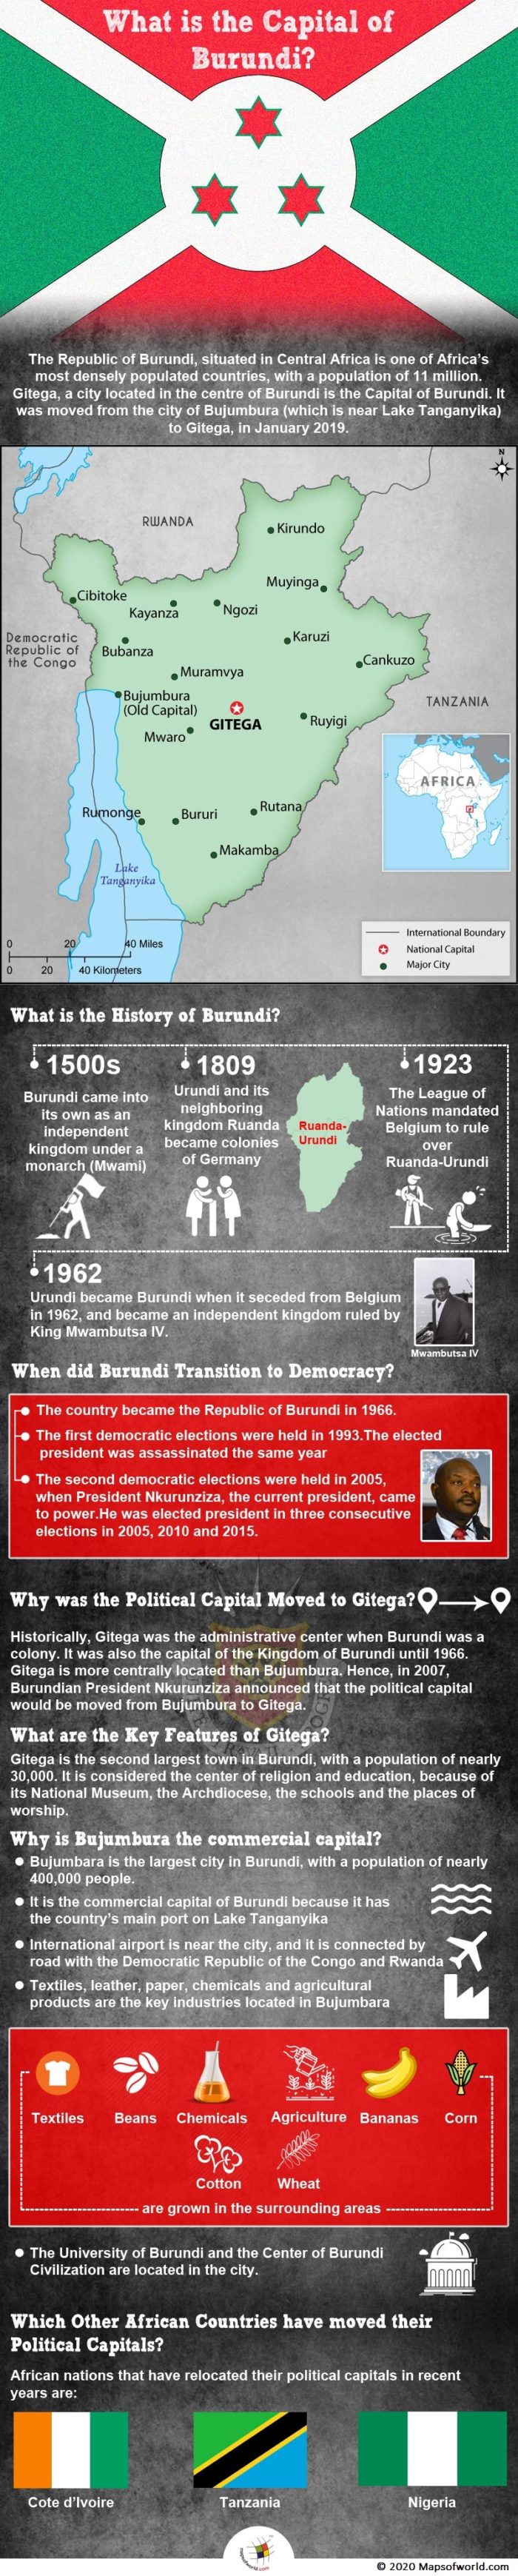 Infographic Giving Details on the Capital of Burundi